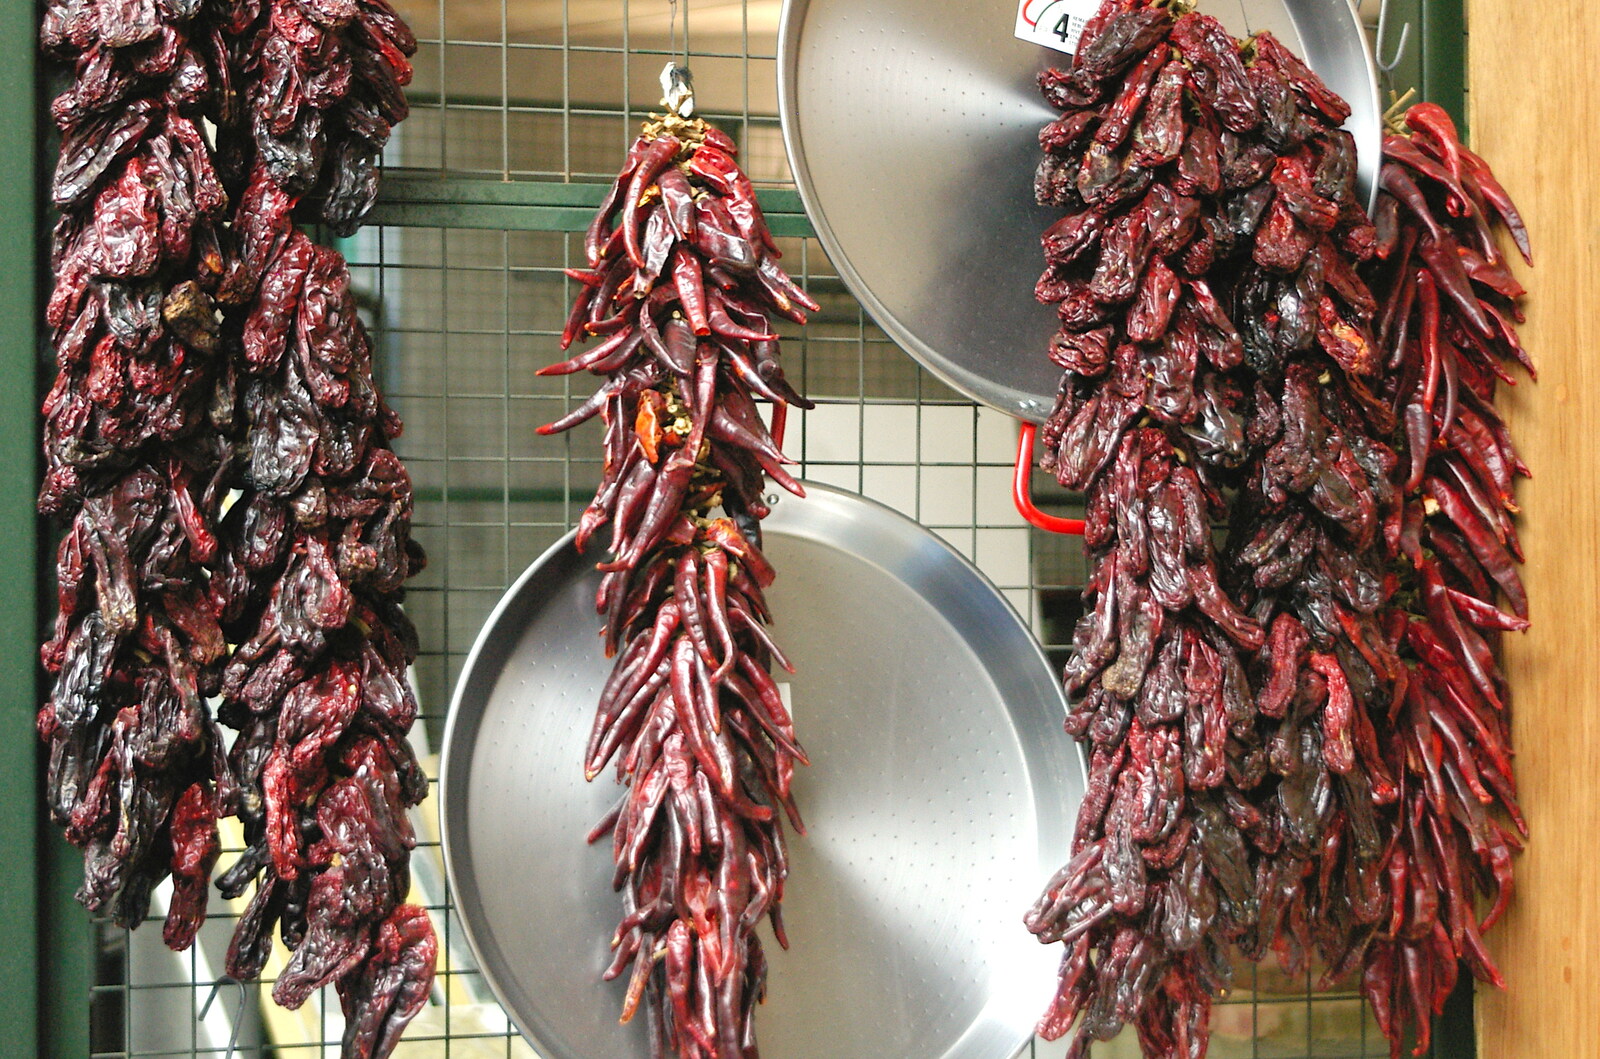 Hanging dried chillies from Borough Market and North Clapham Tapas, London - 23rd July 2005